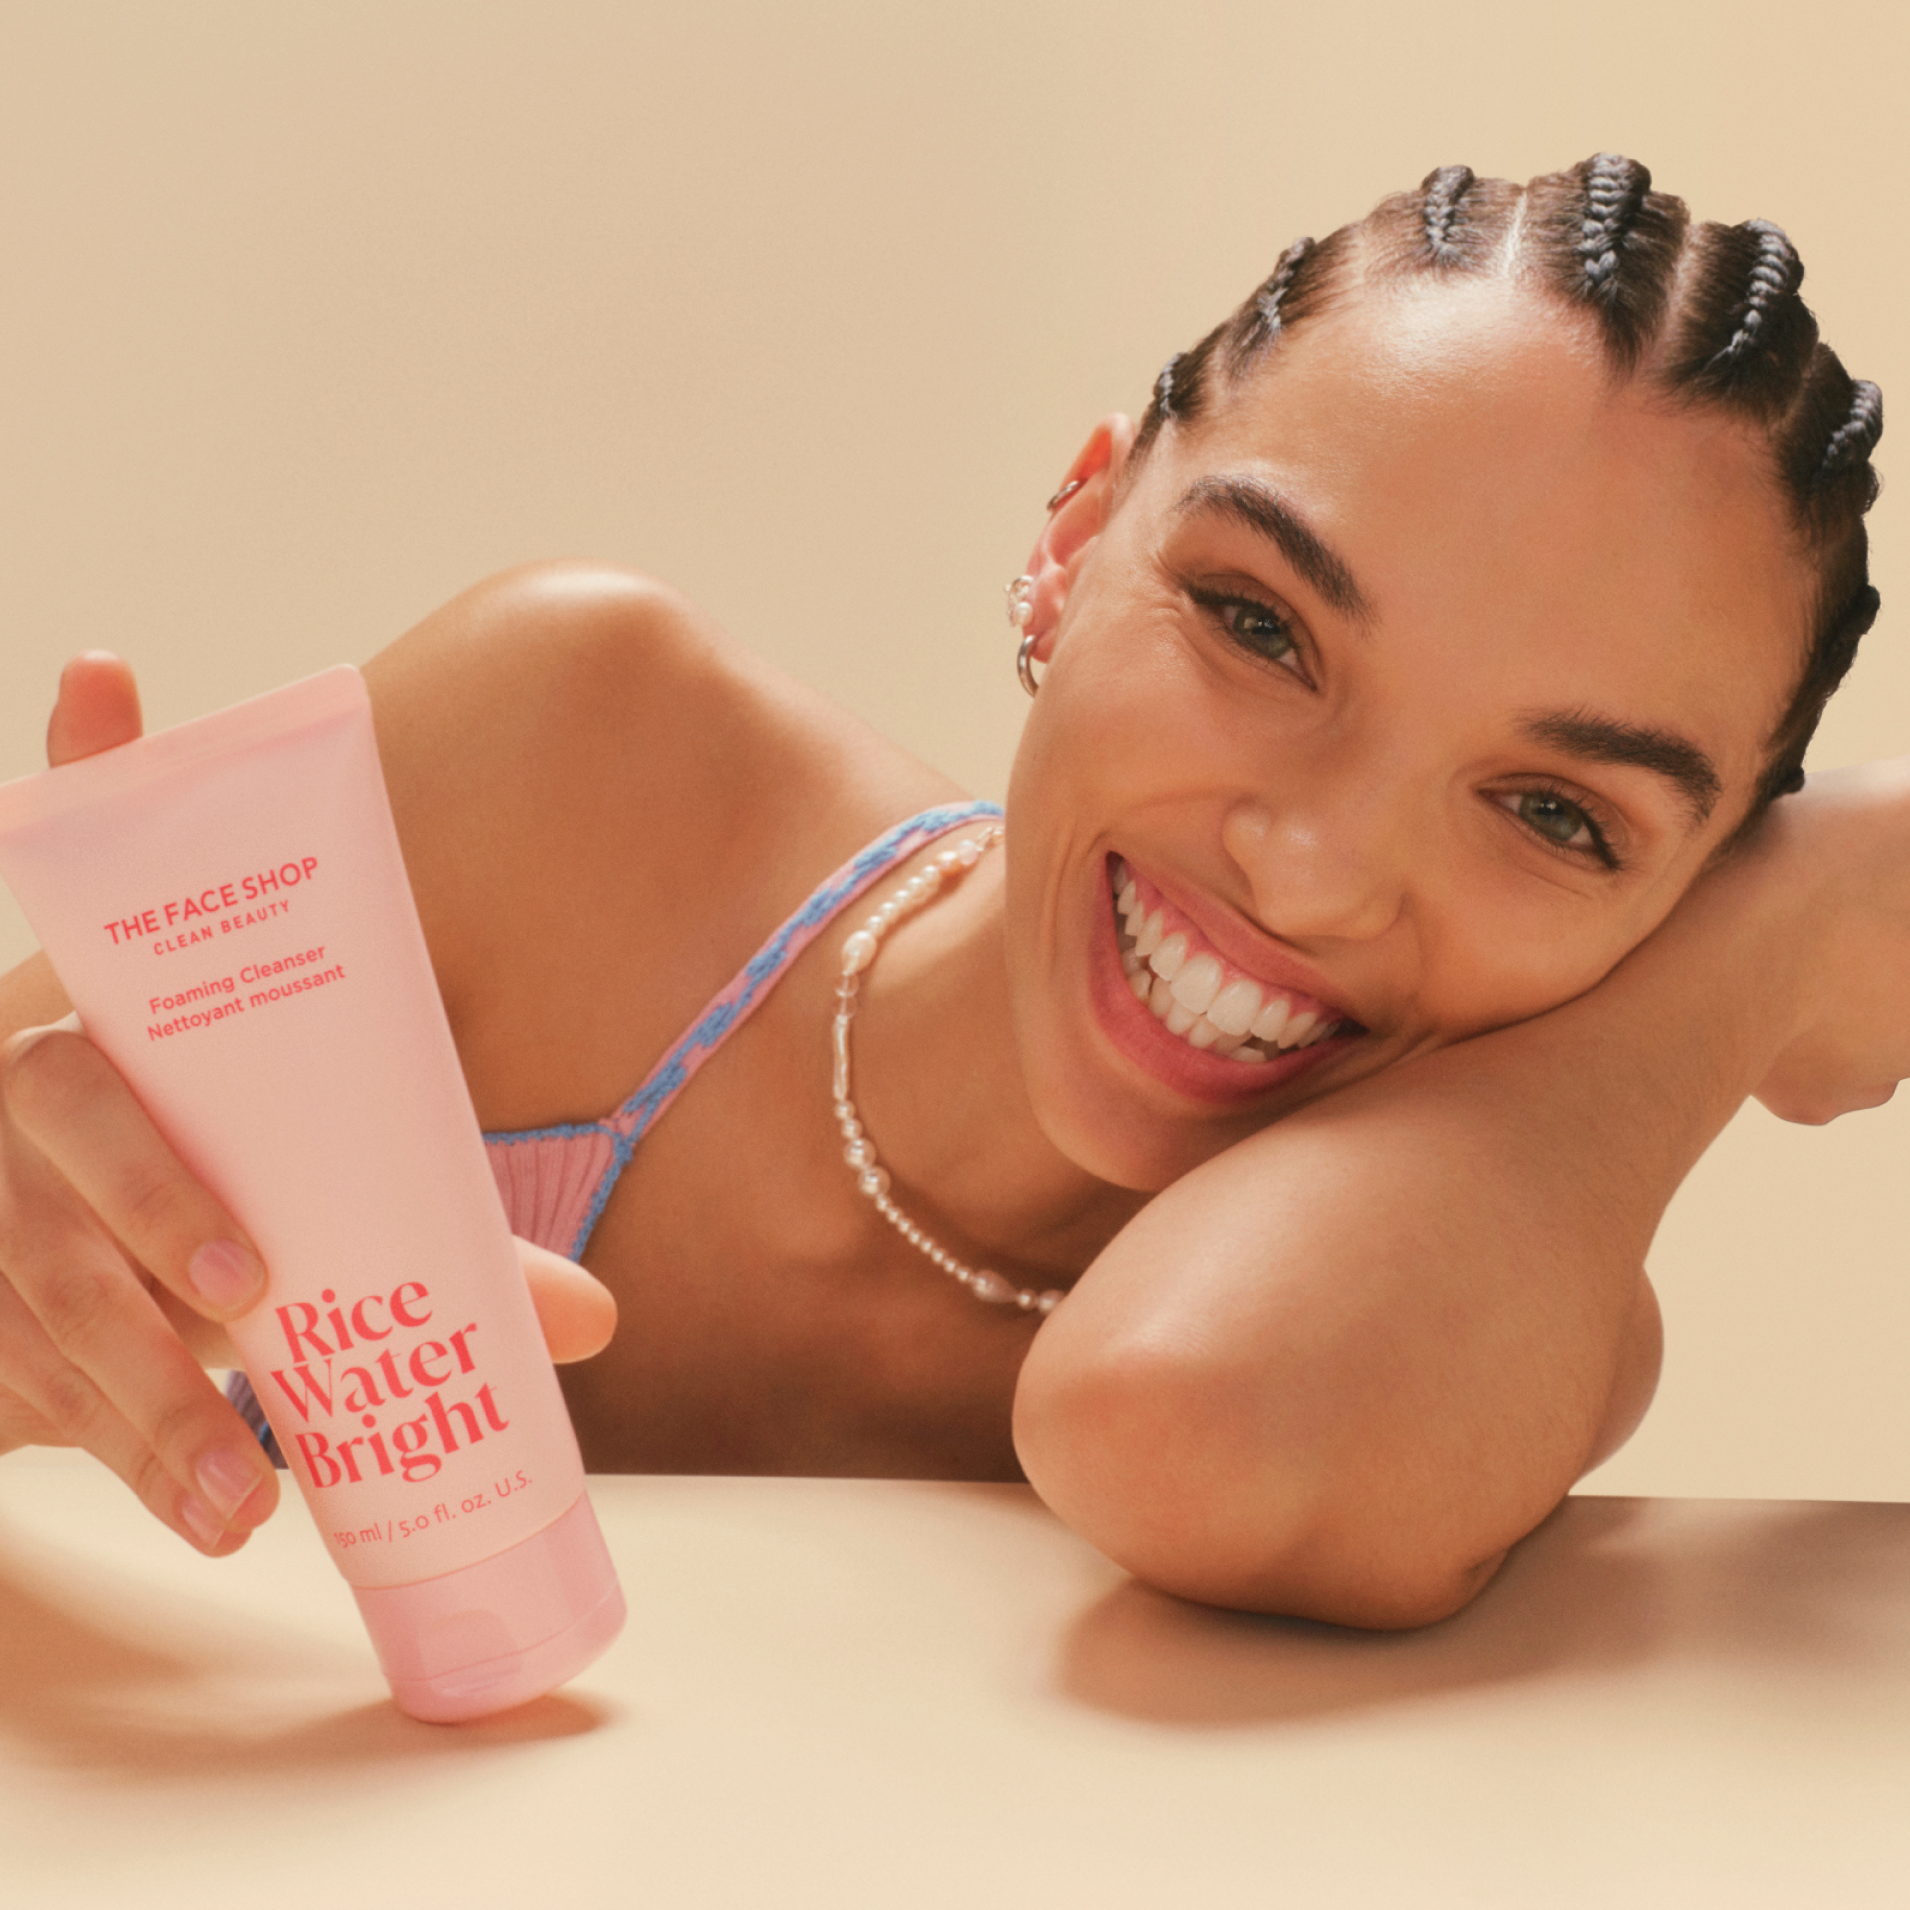 A joyful woman with cornrow braids smiles warmly, holding up a pink bottle of the face shop rice water bright foaming cleanser against a soft beige background.